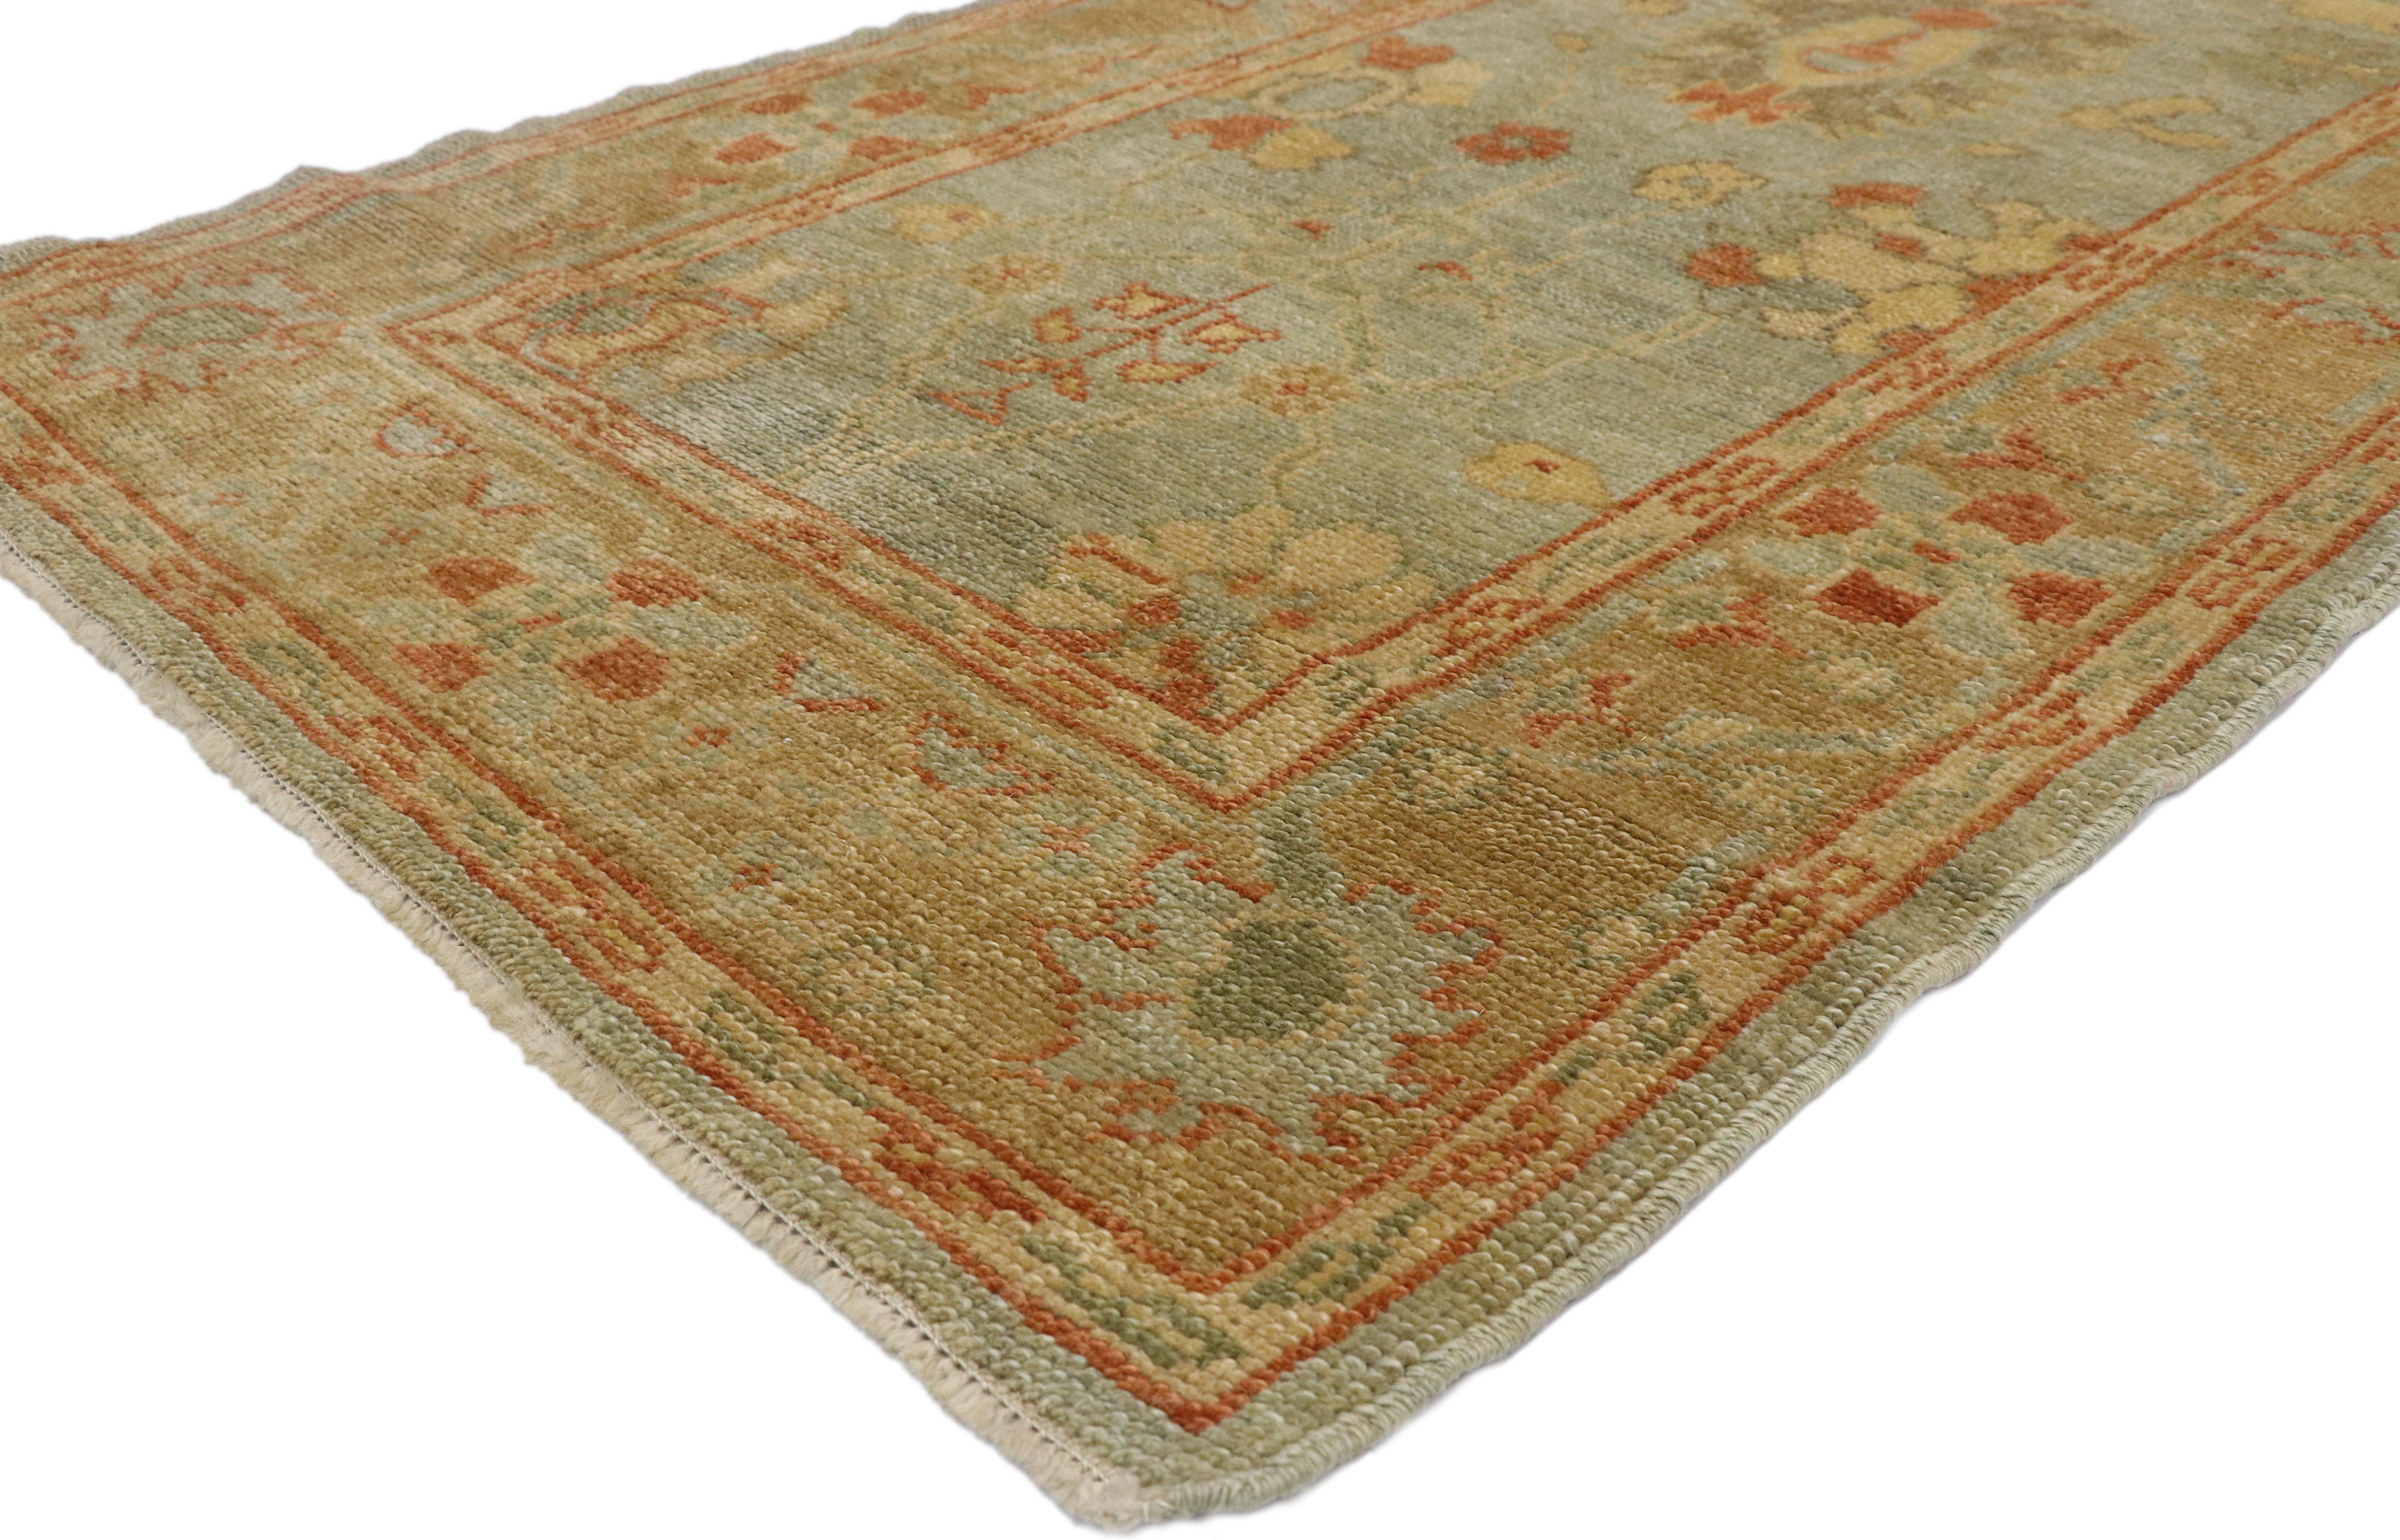 50539 New Contemporary Turkish Oushak Runner with Warm, Mediterranean Style. With its hues in harmony inspired by warm, Mediterranean style, this hand knotted wool contemporary Turkish Oushak runner is well-balanced and poised to impress. It